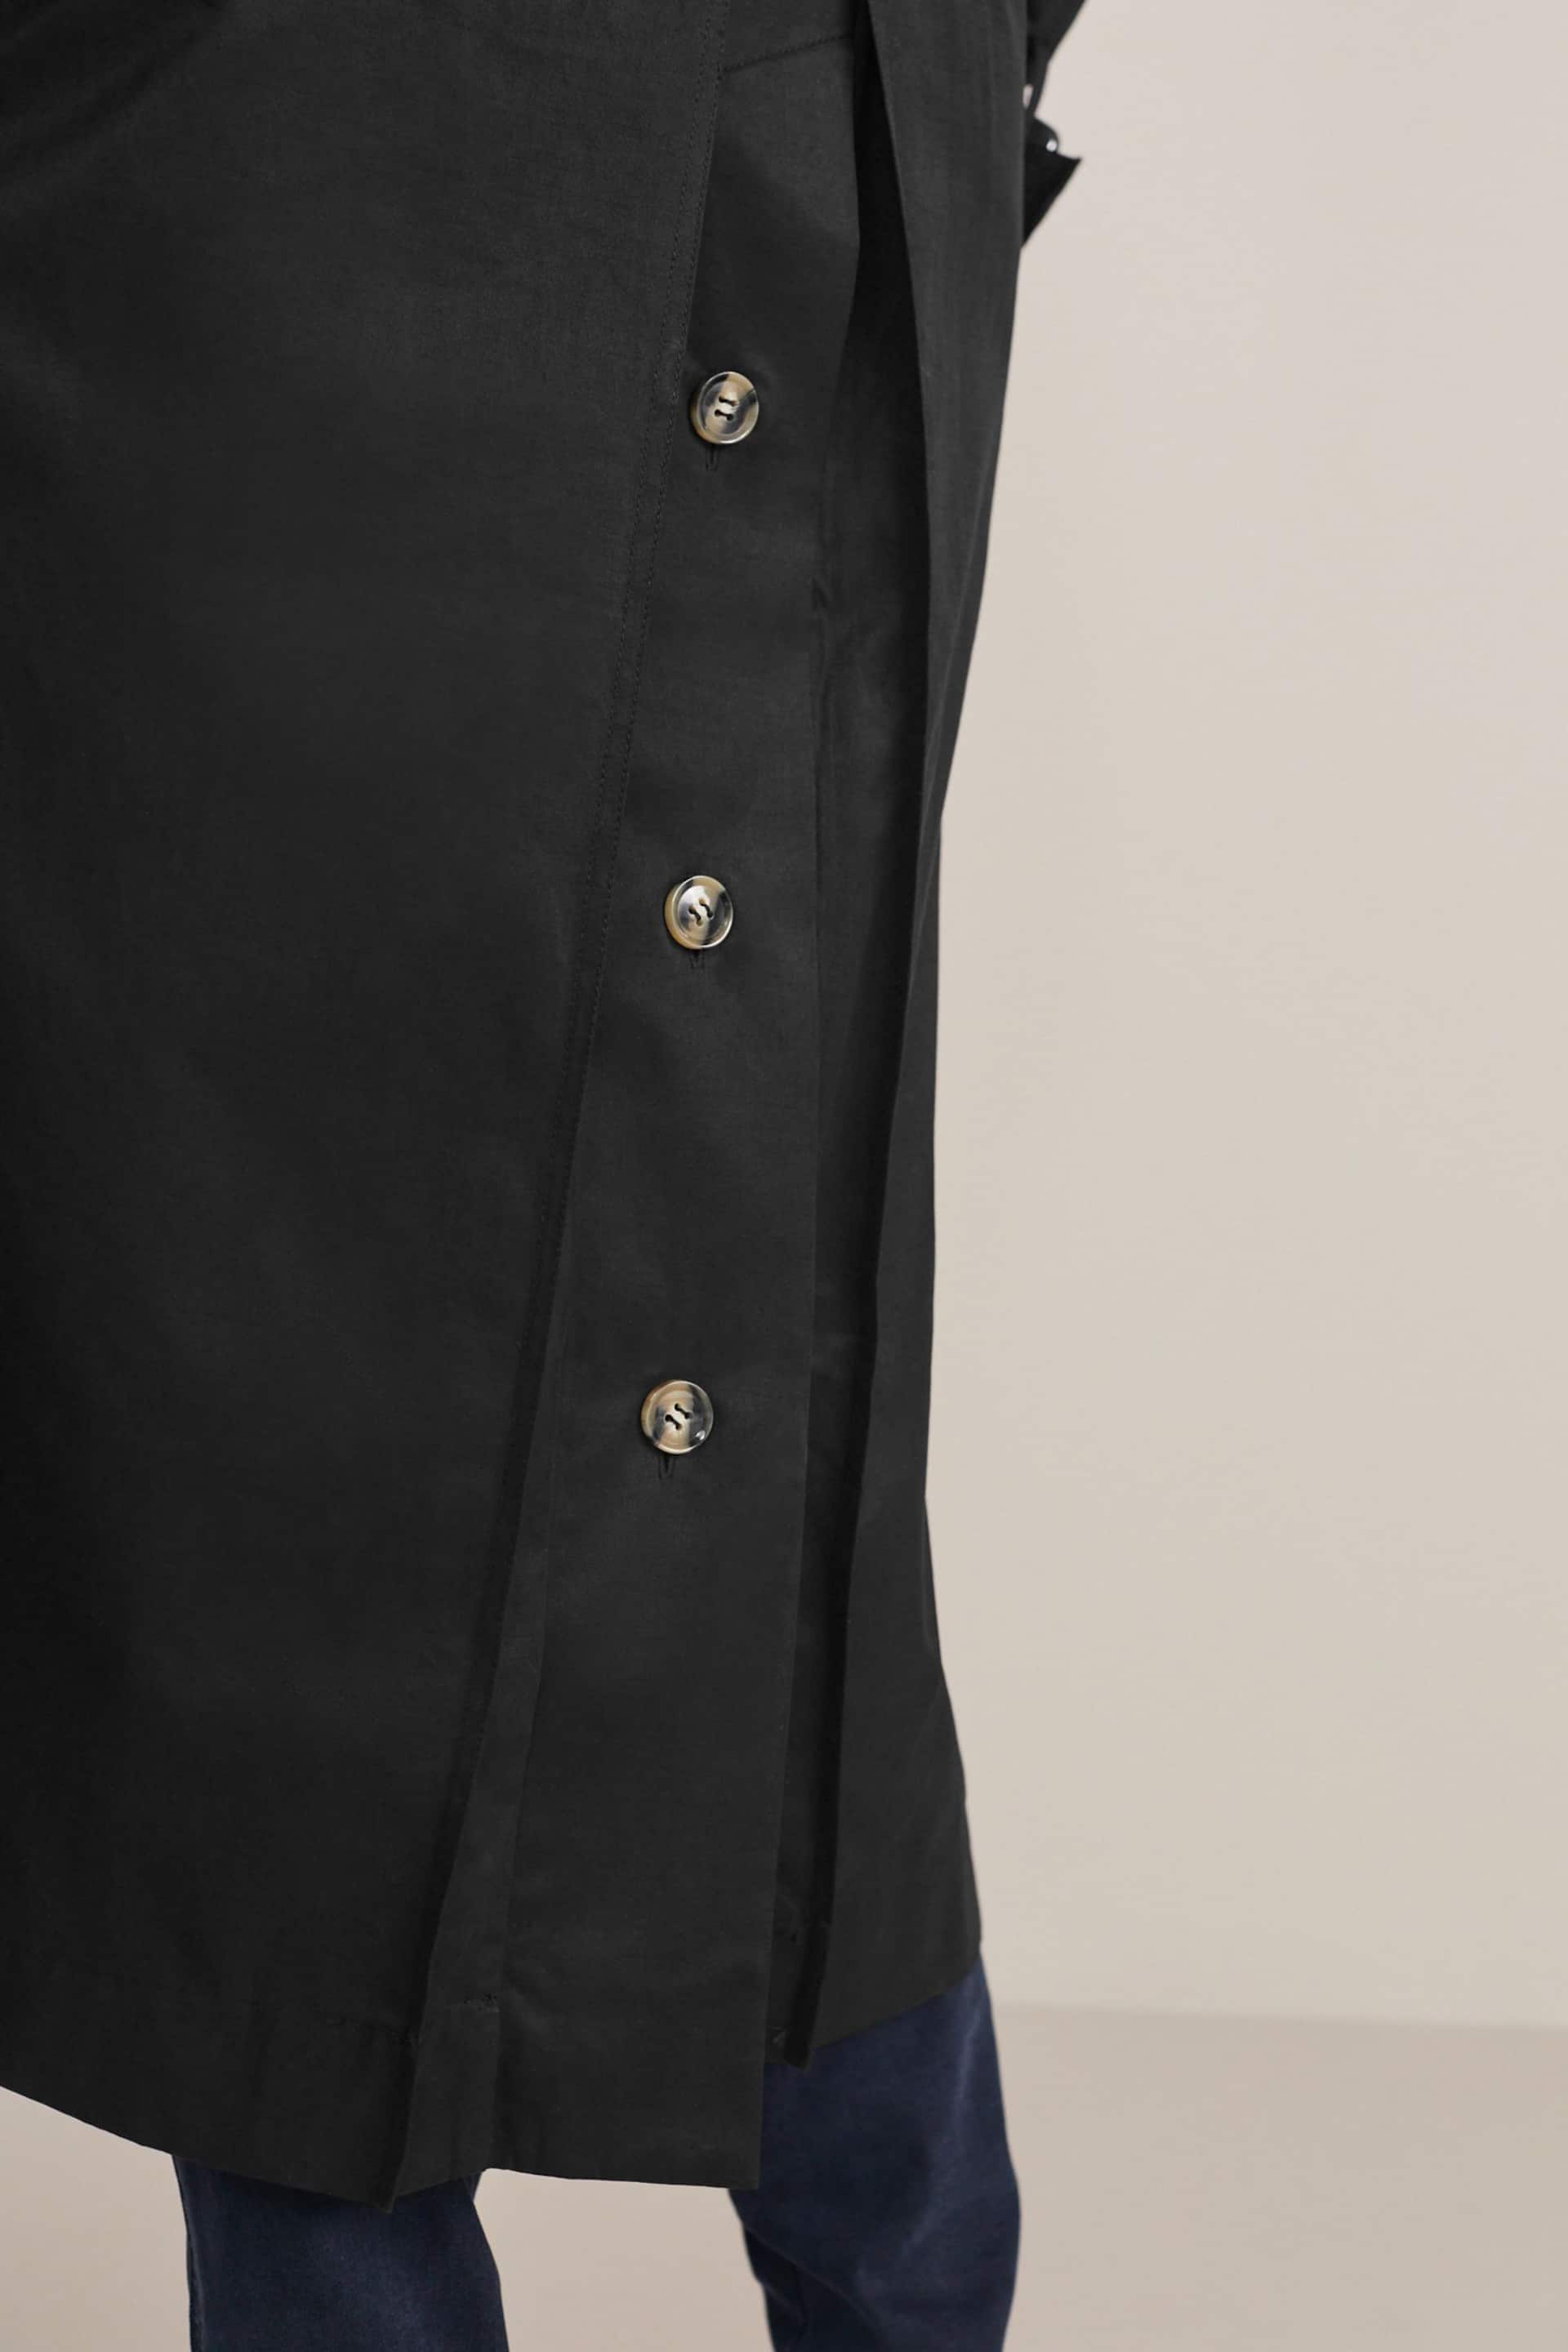 Black Belted Trench Coat - Image 5 of 9